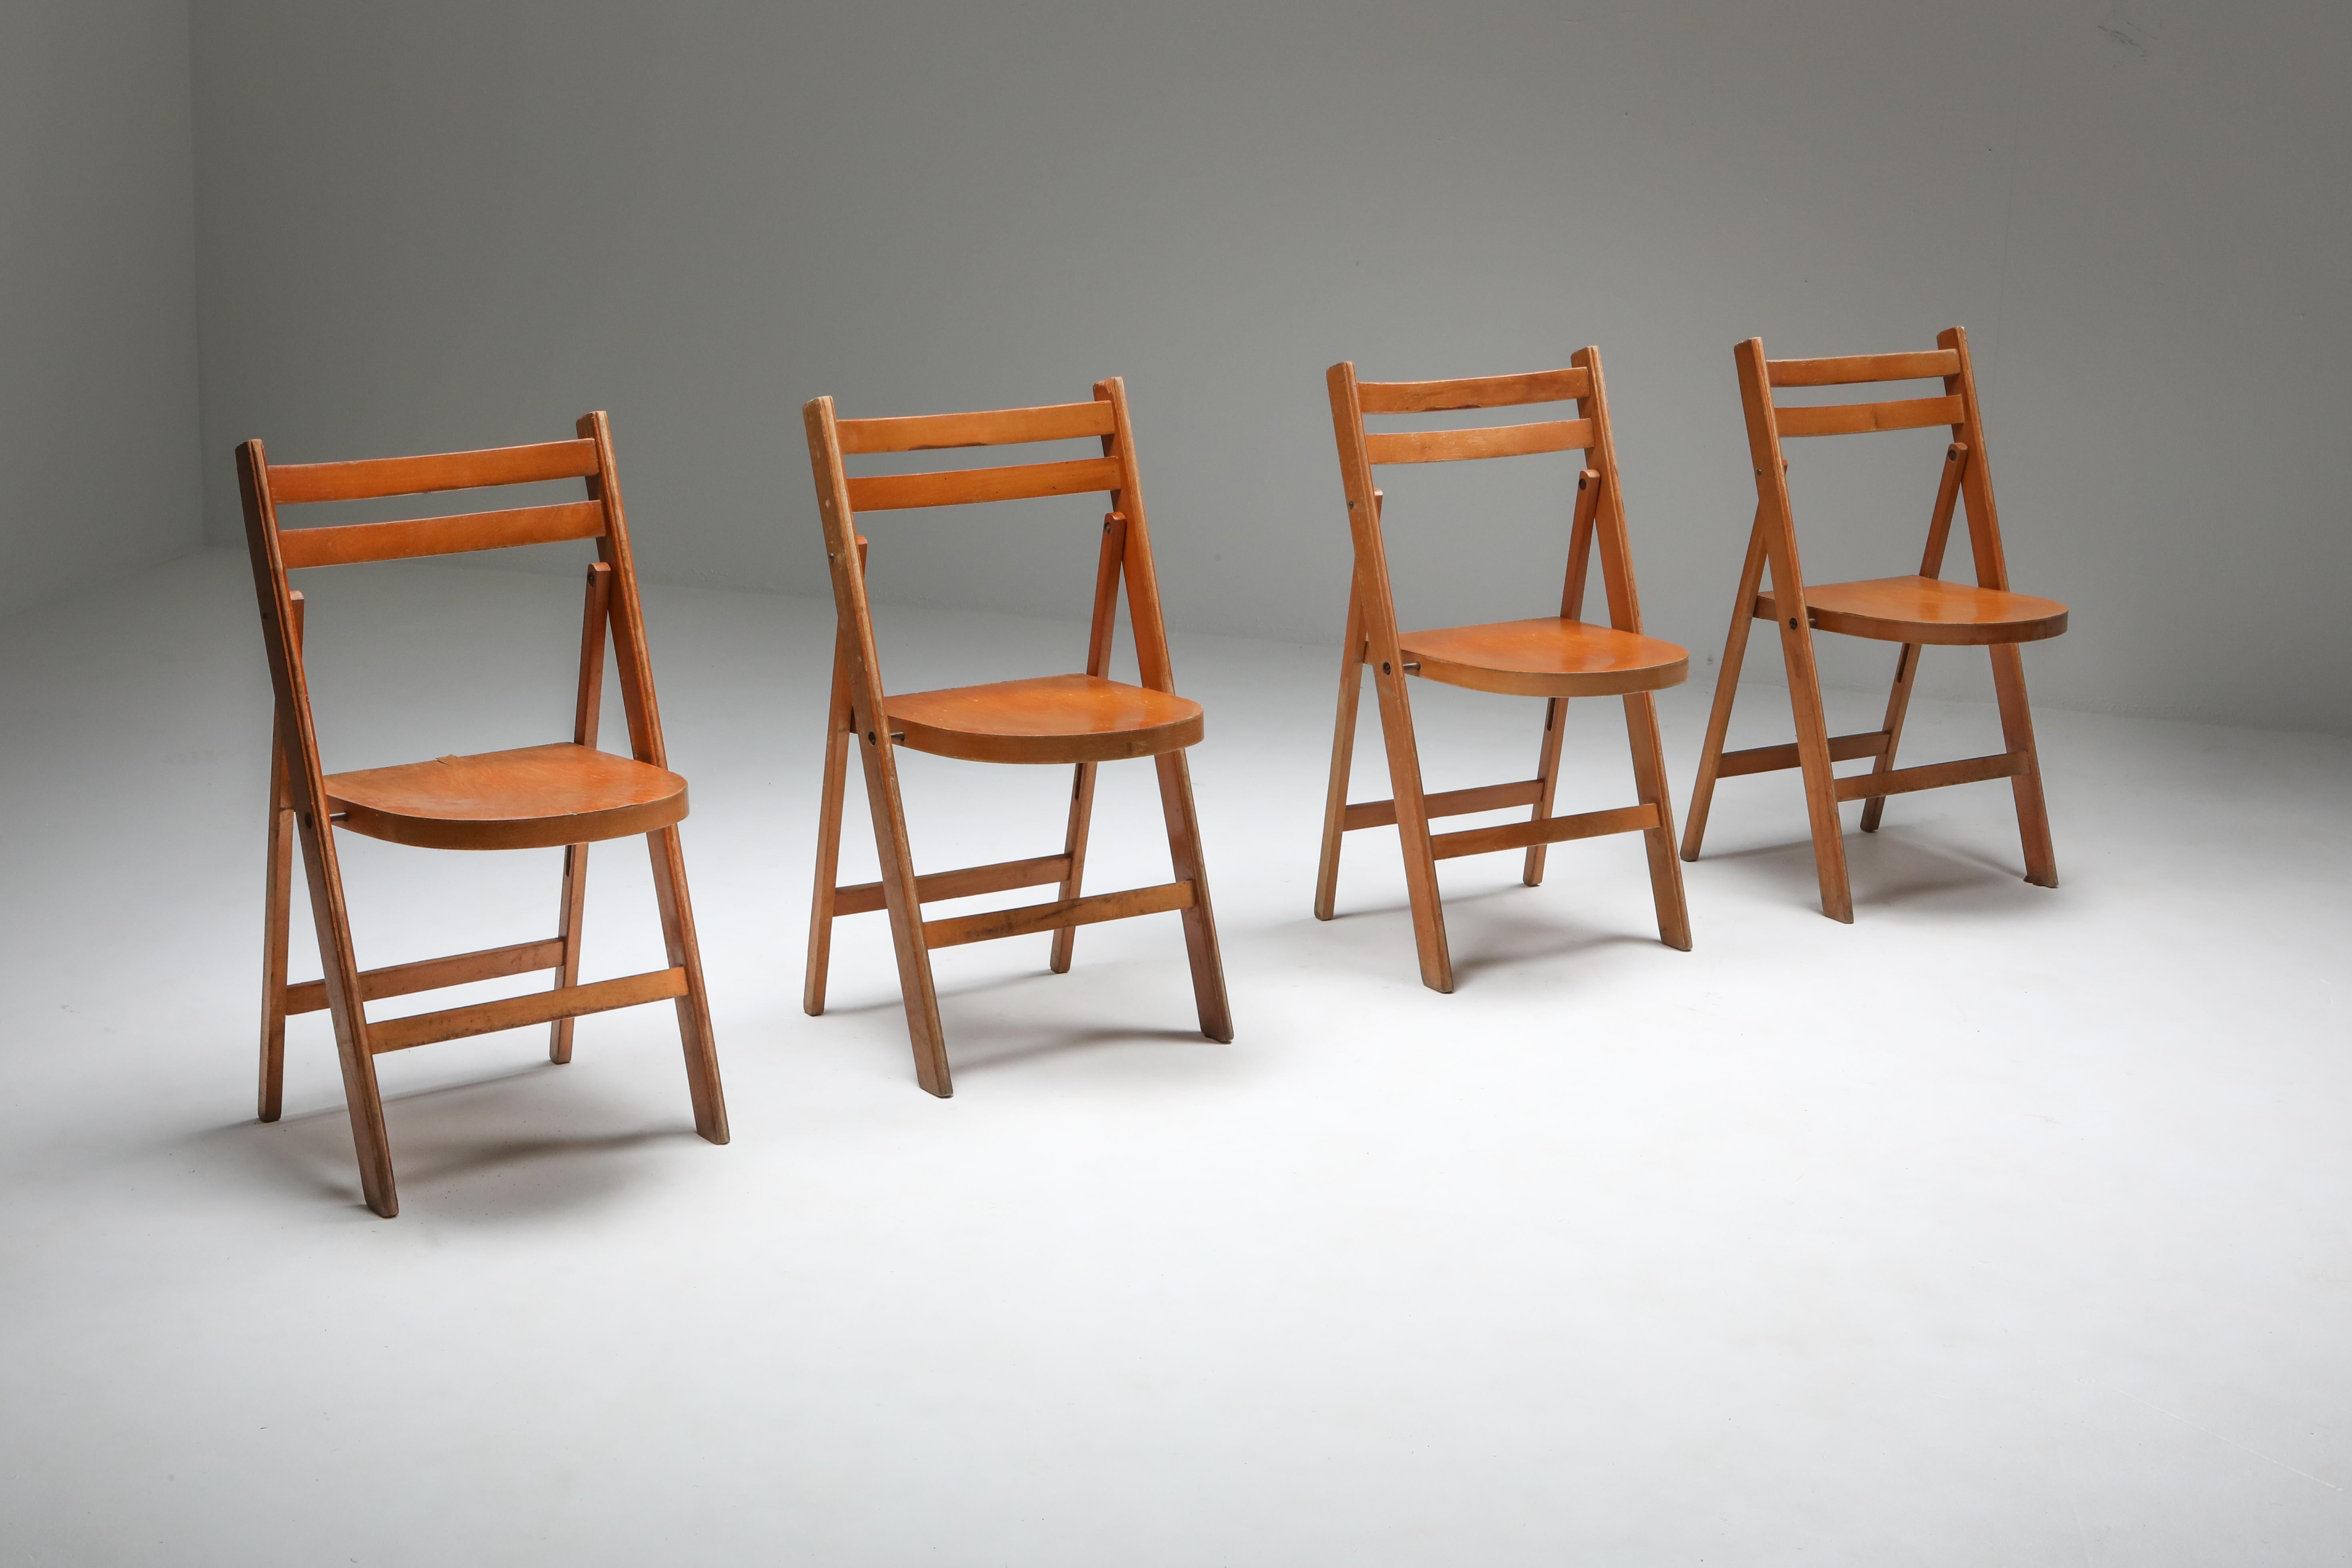 Vintage 1950s Dutch folding chairs in beech with brass details
A great Mid-Century Modern set 
they are stackable which make them ideal for restaurants, bar or events
30 pieces available
Price per piece.
 